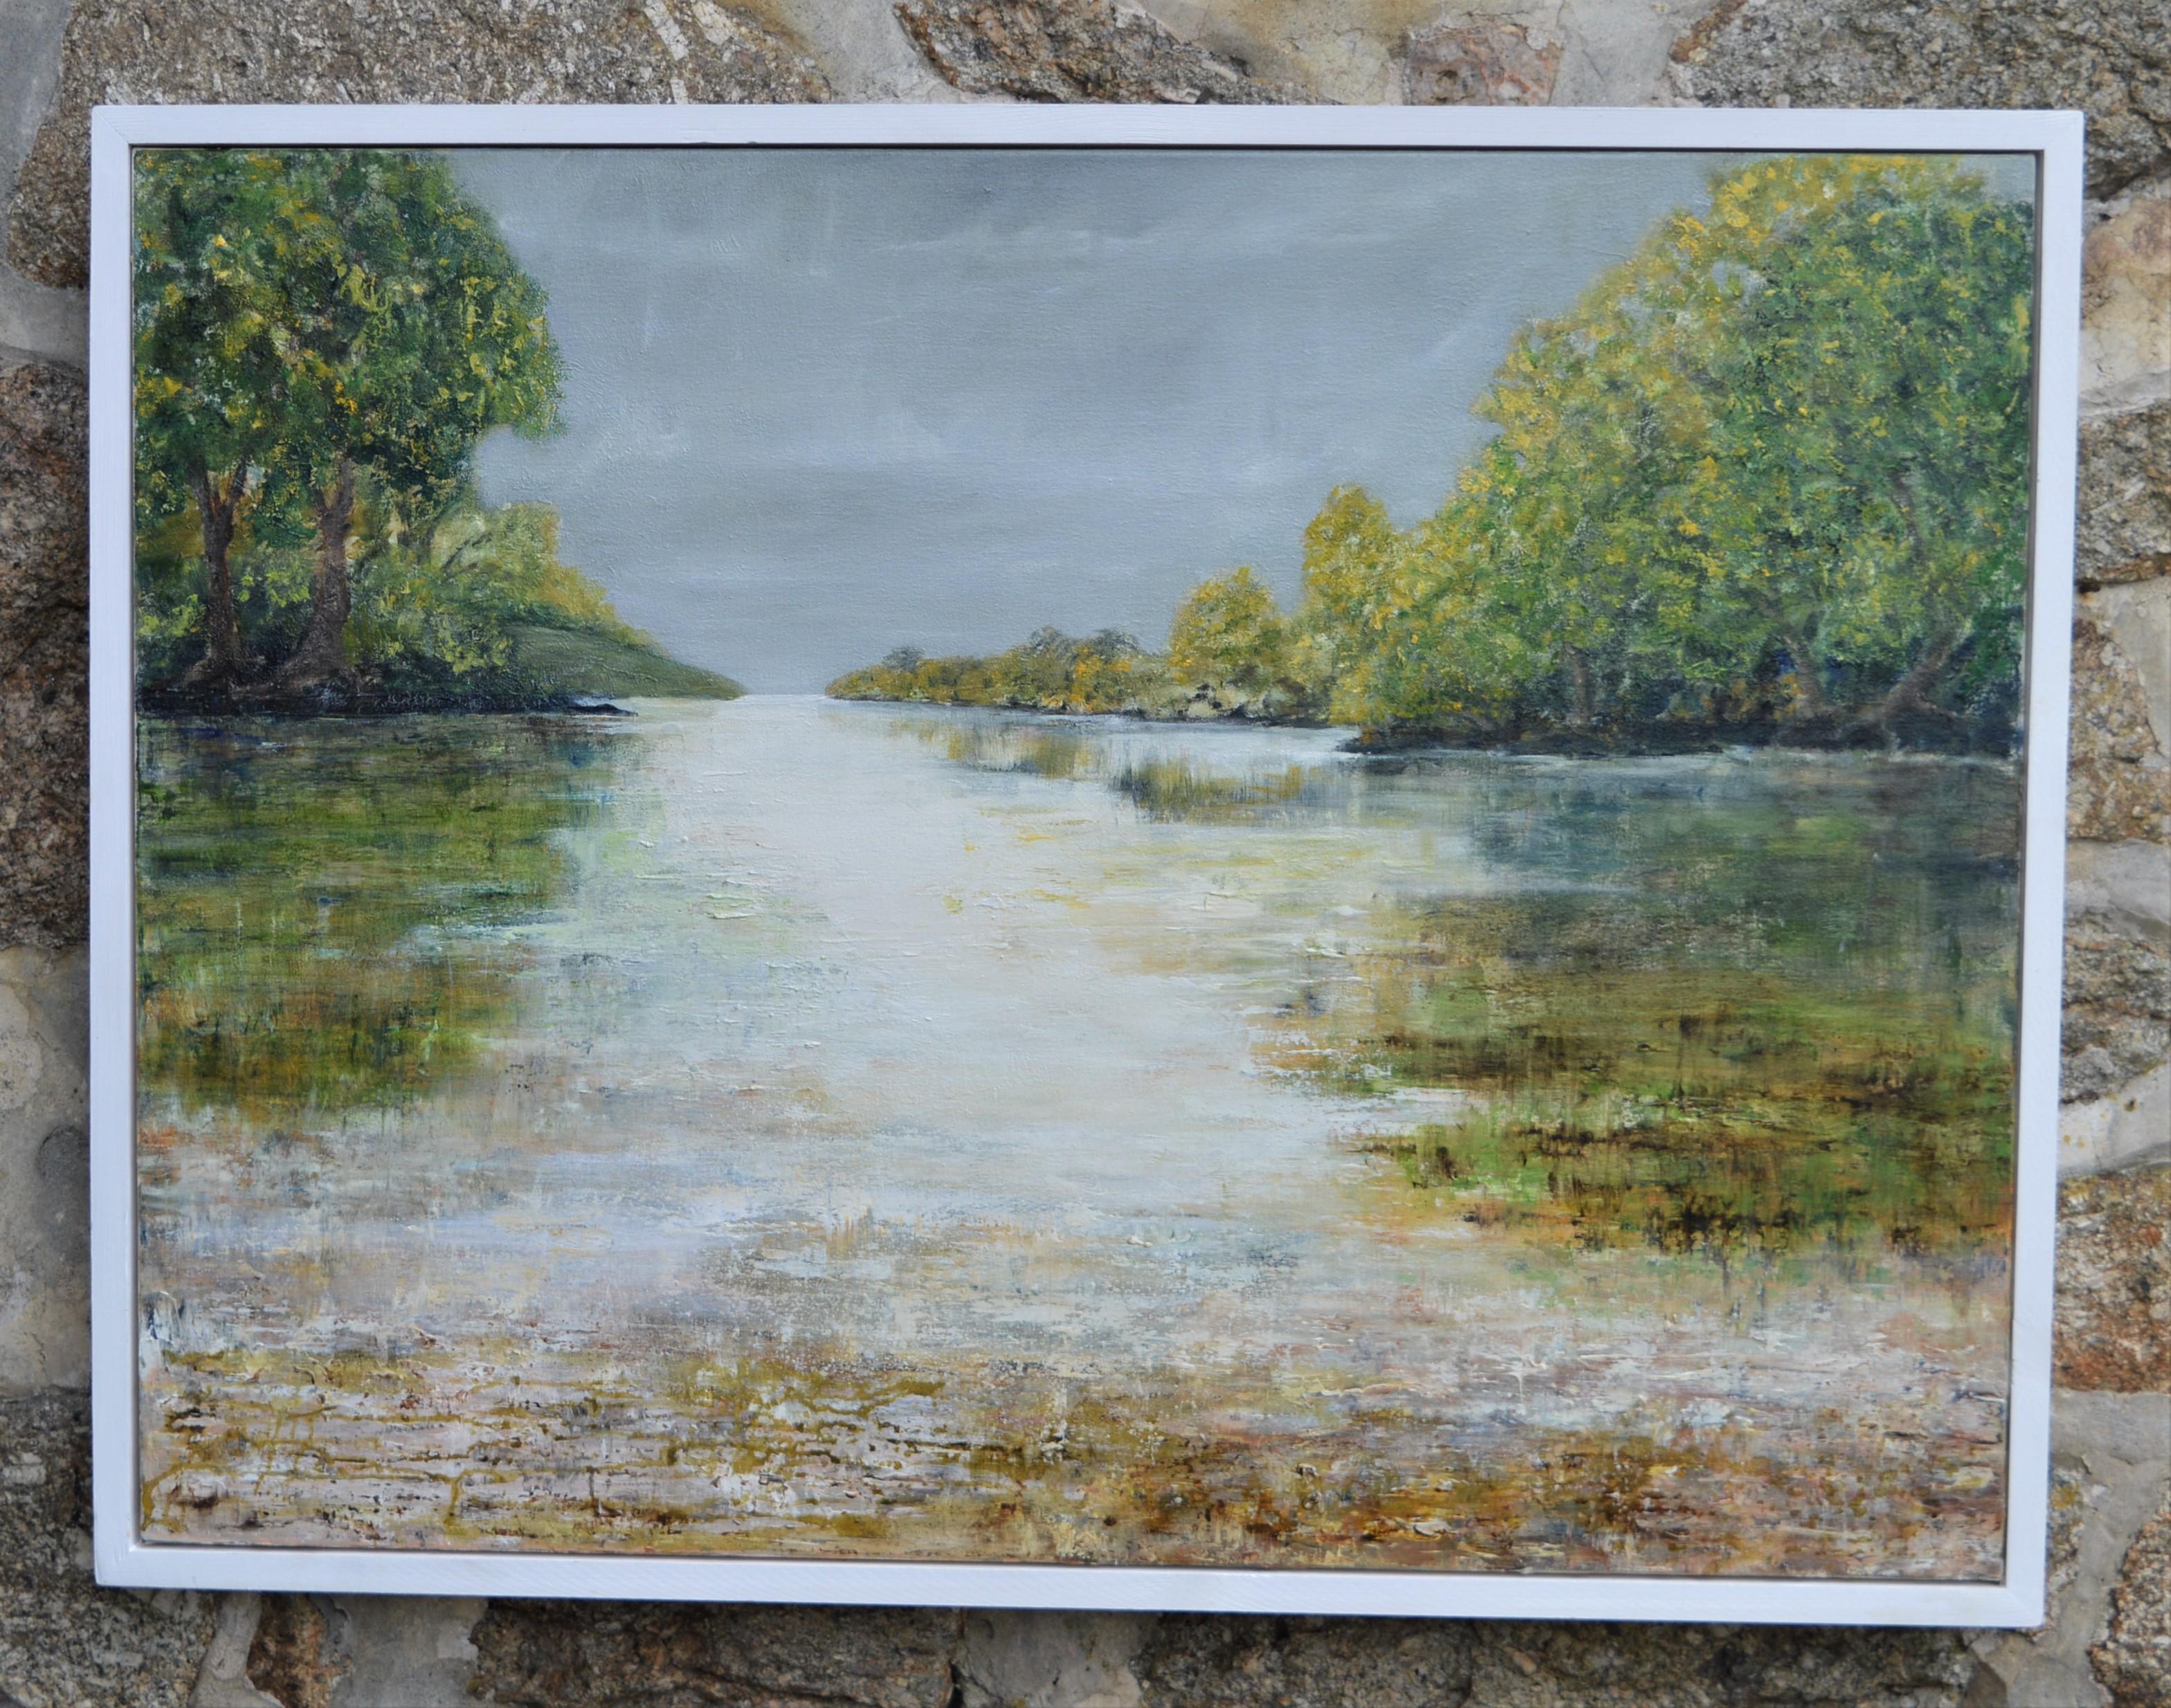 A River Flows Through.  Contemporary English Landscape - Painting by Penny Rumble